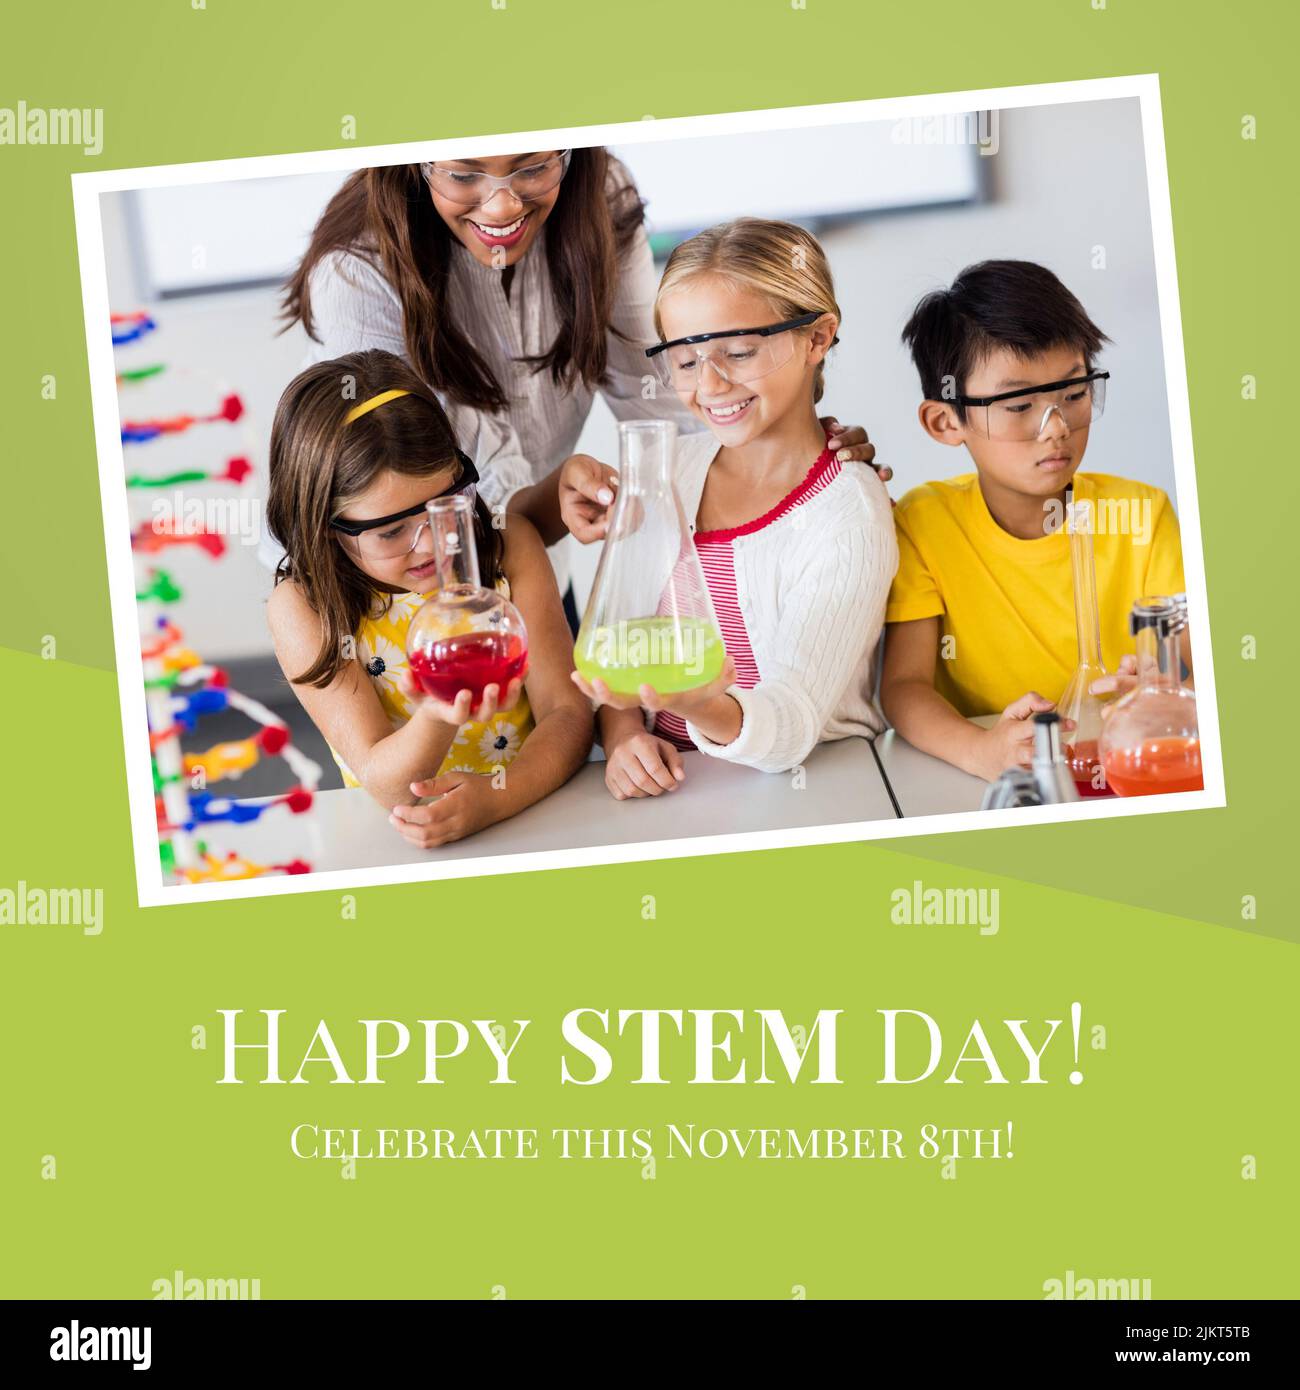 Composition of happy stem day text and photo of diverse school children in laboratory Stock Photo